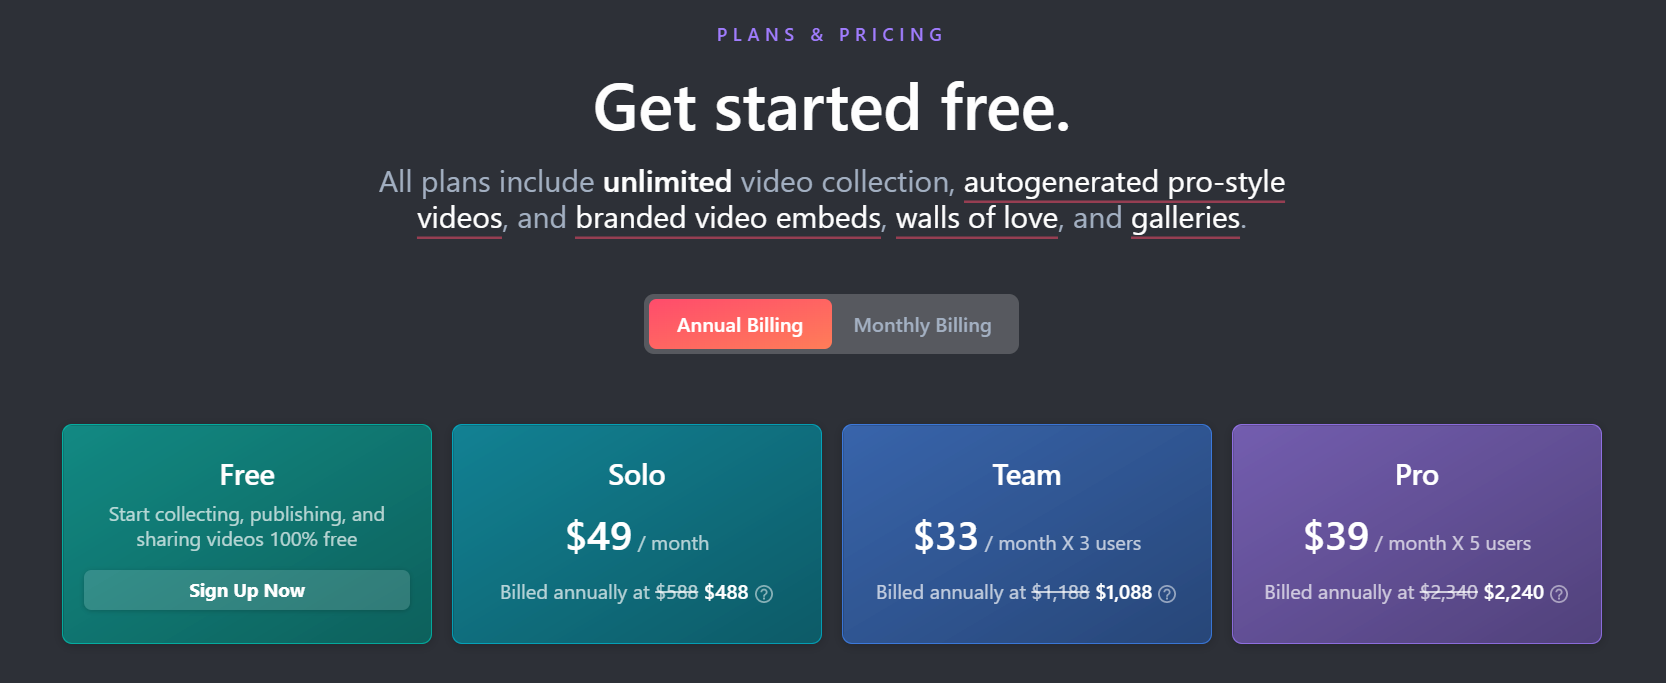 Vocal Video Plans & Pricing: Free, Solo, Team, and Pro